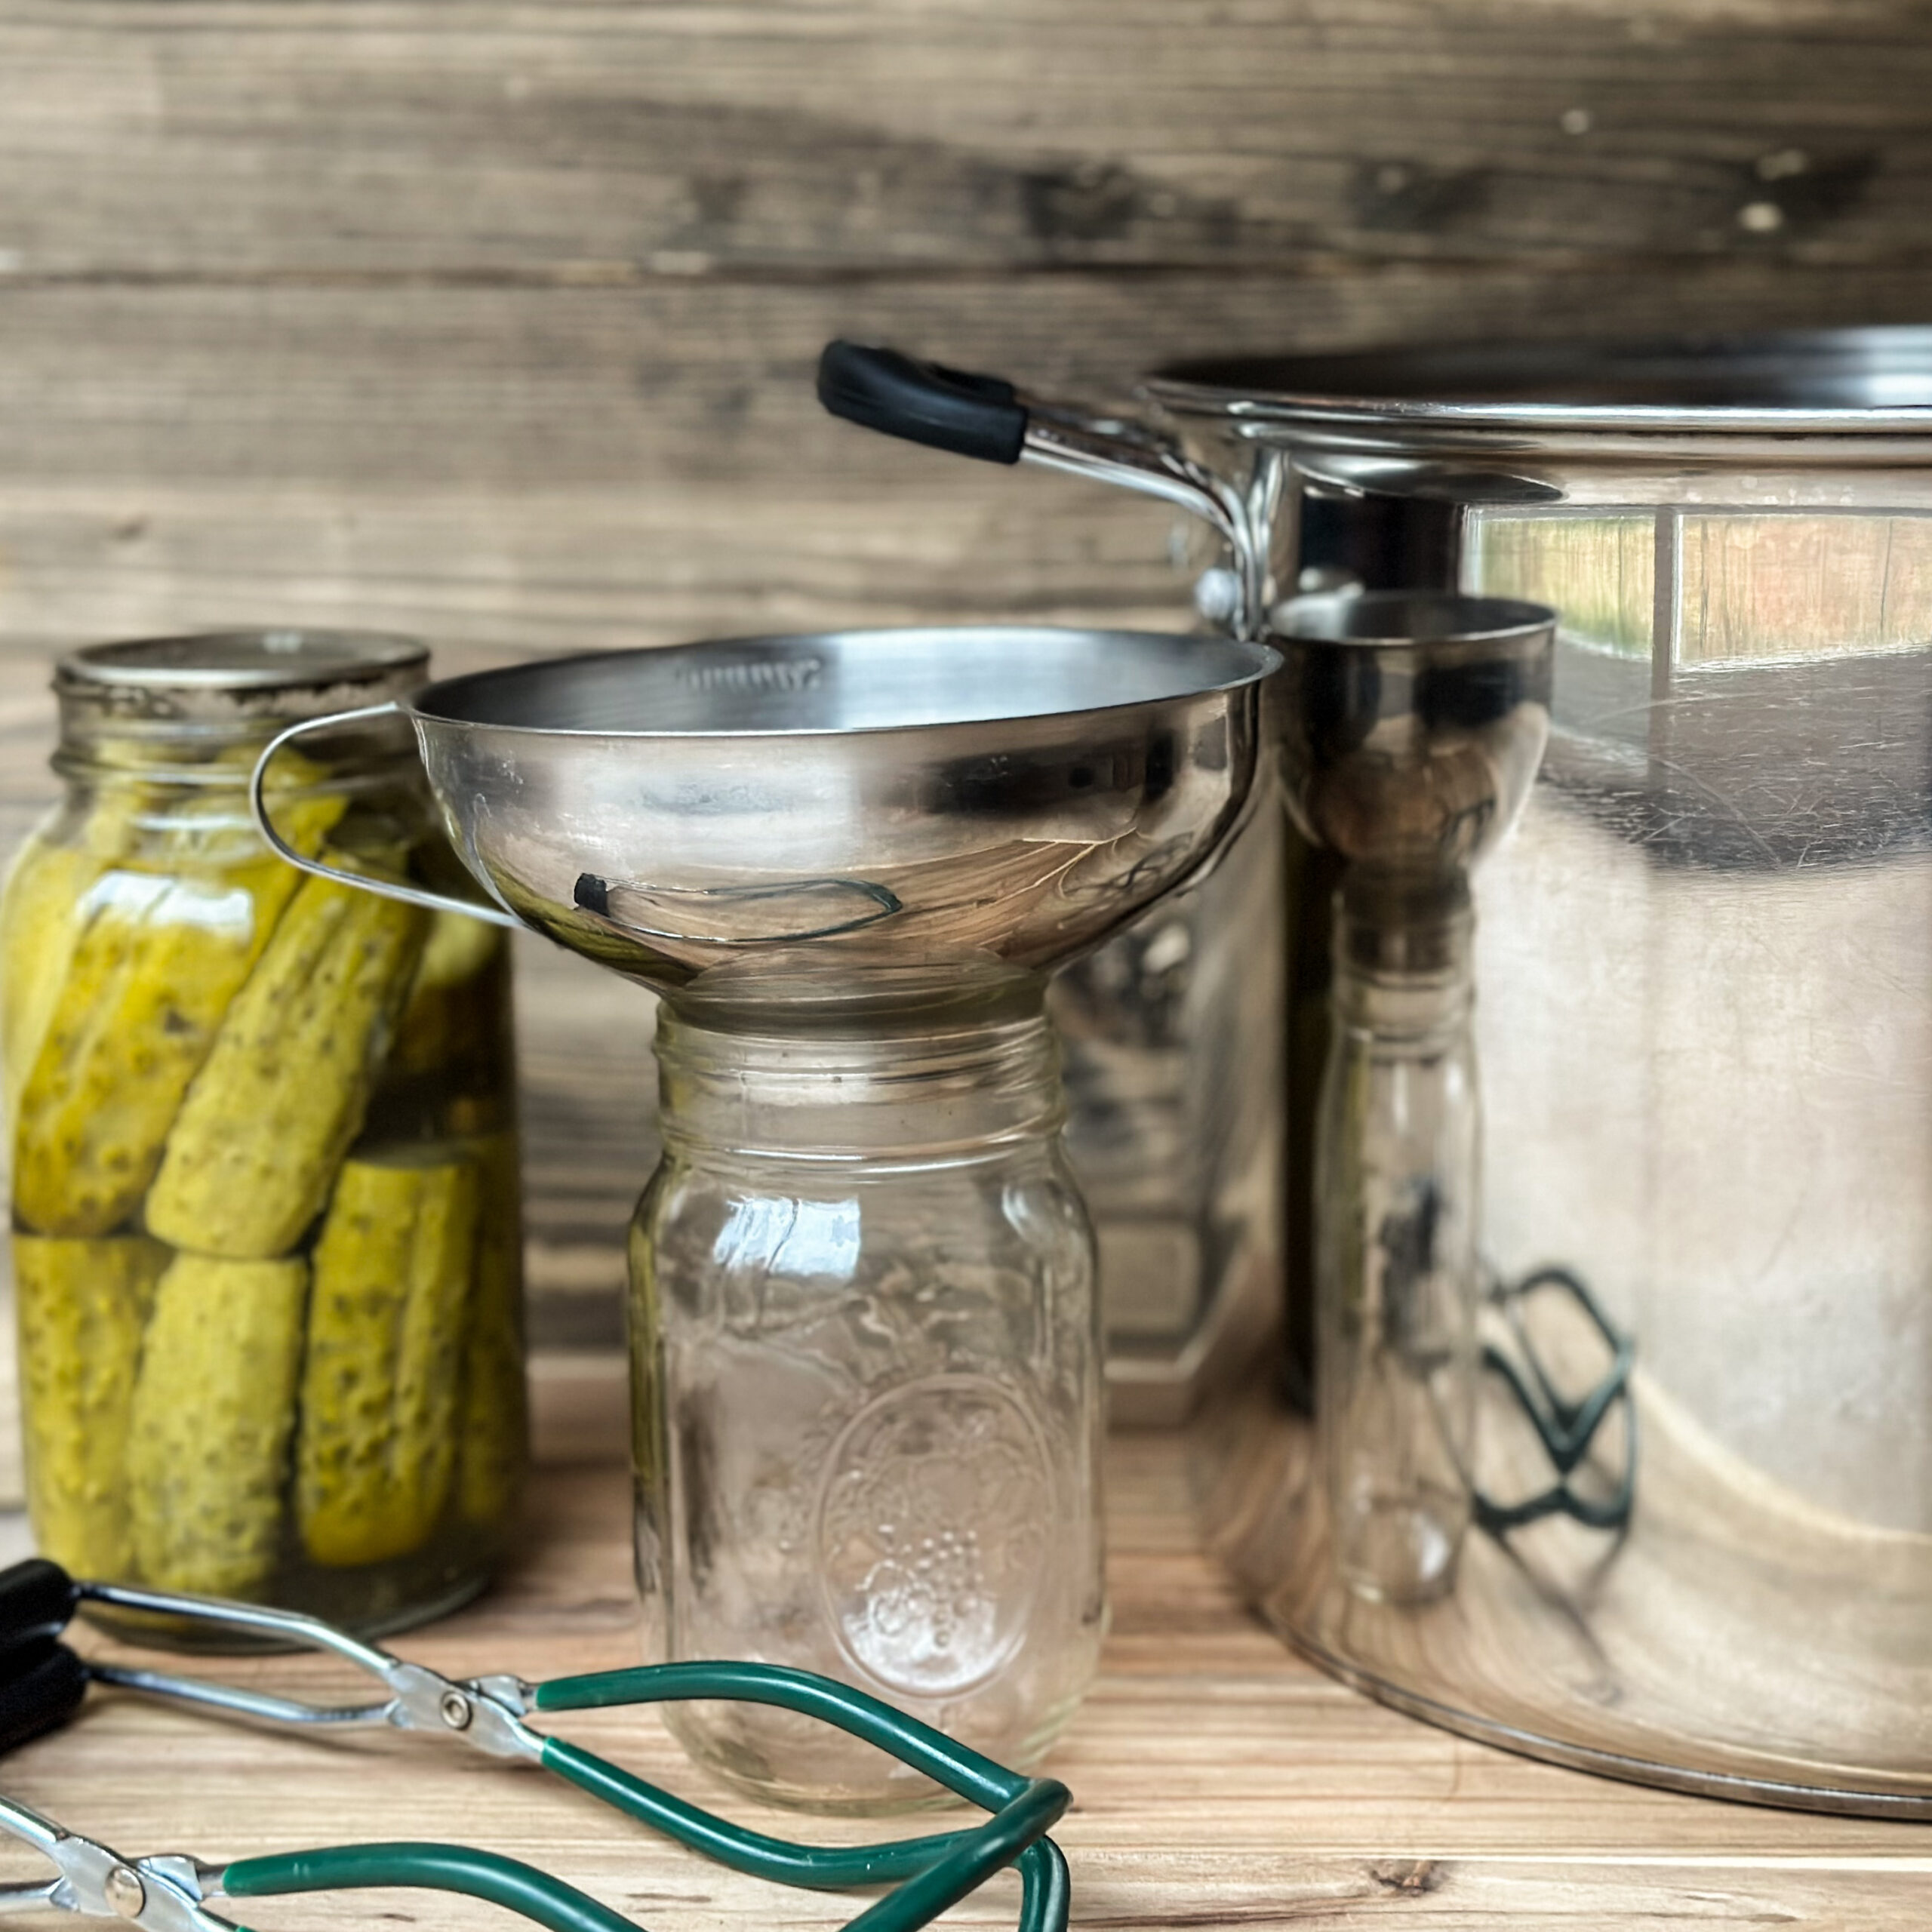 Water Bath Canning vs Pressure Canning: Exploring Different Canning Methods